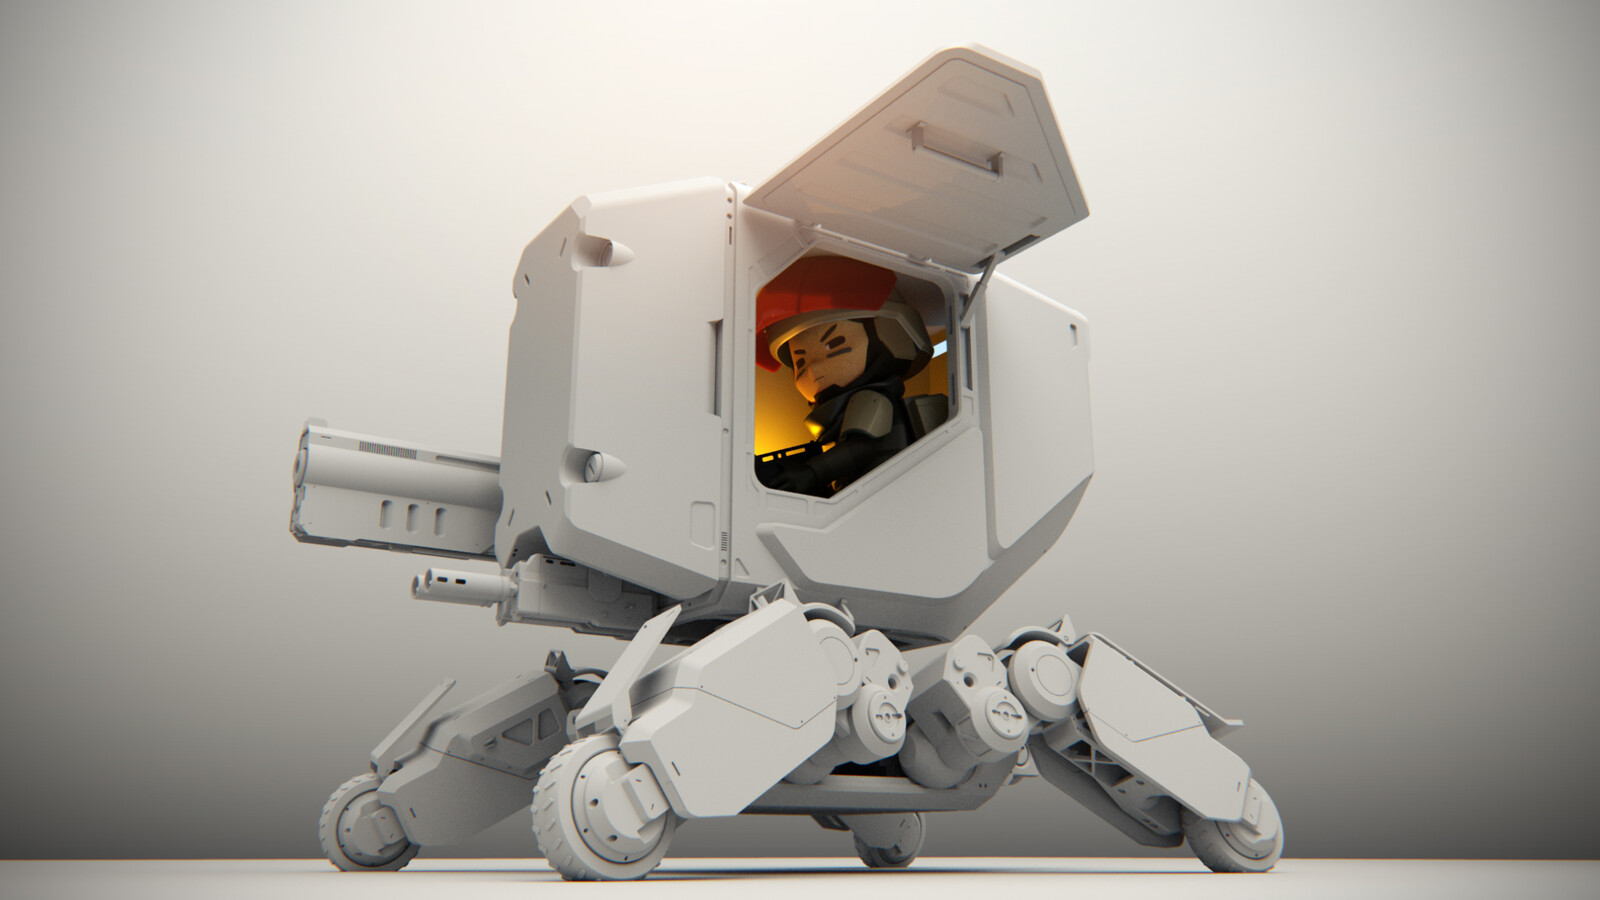 Room for one pilot! This also has an older version of the laser cannon.